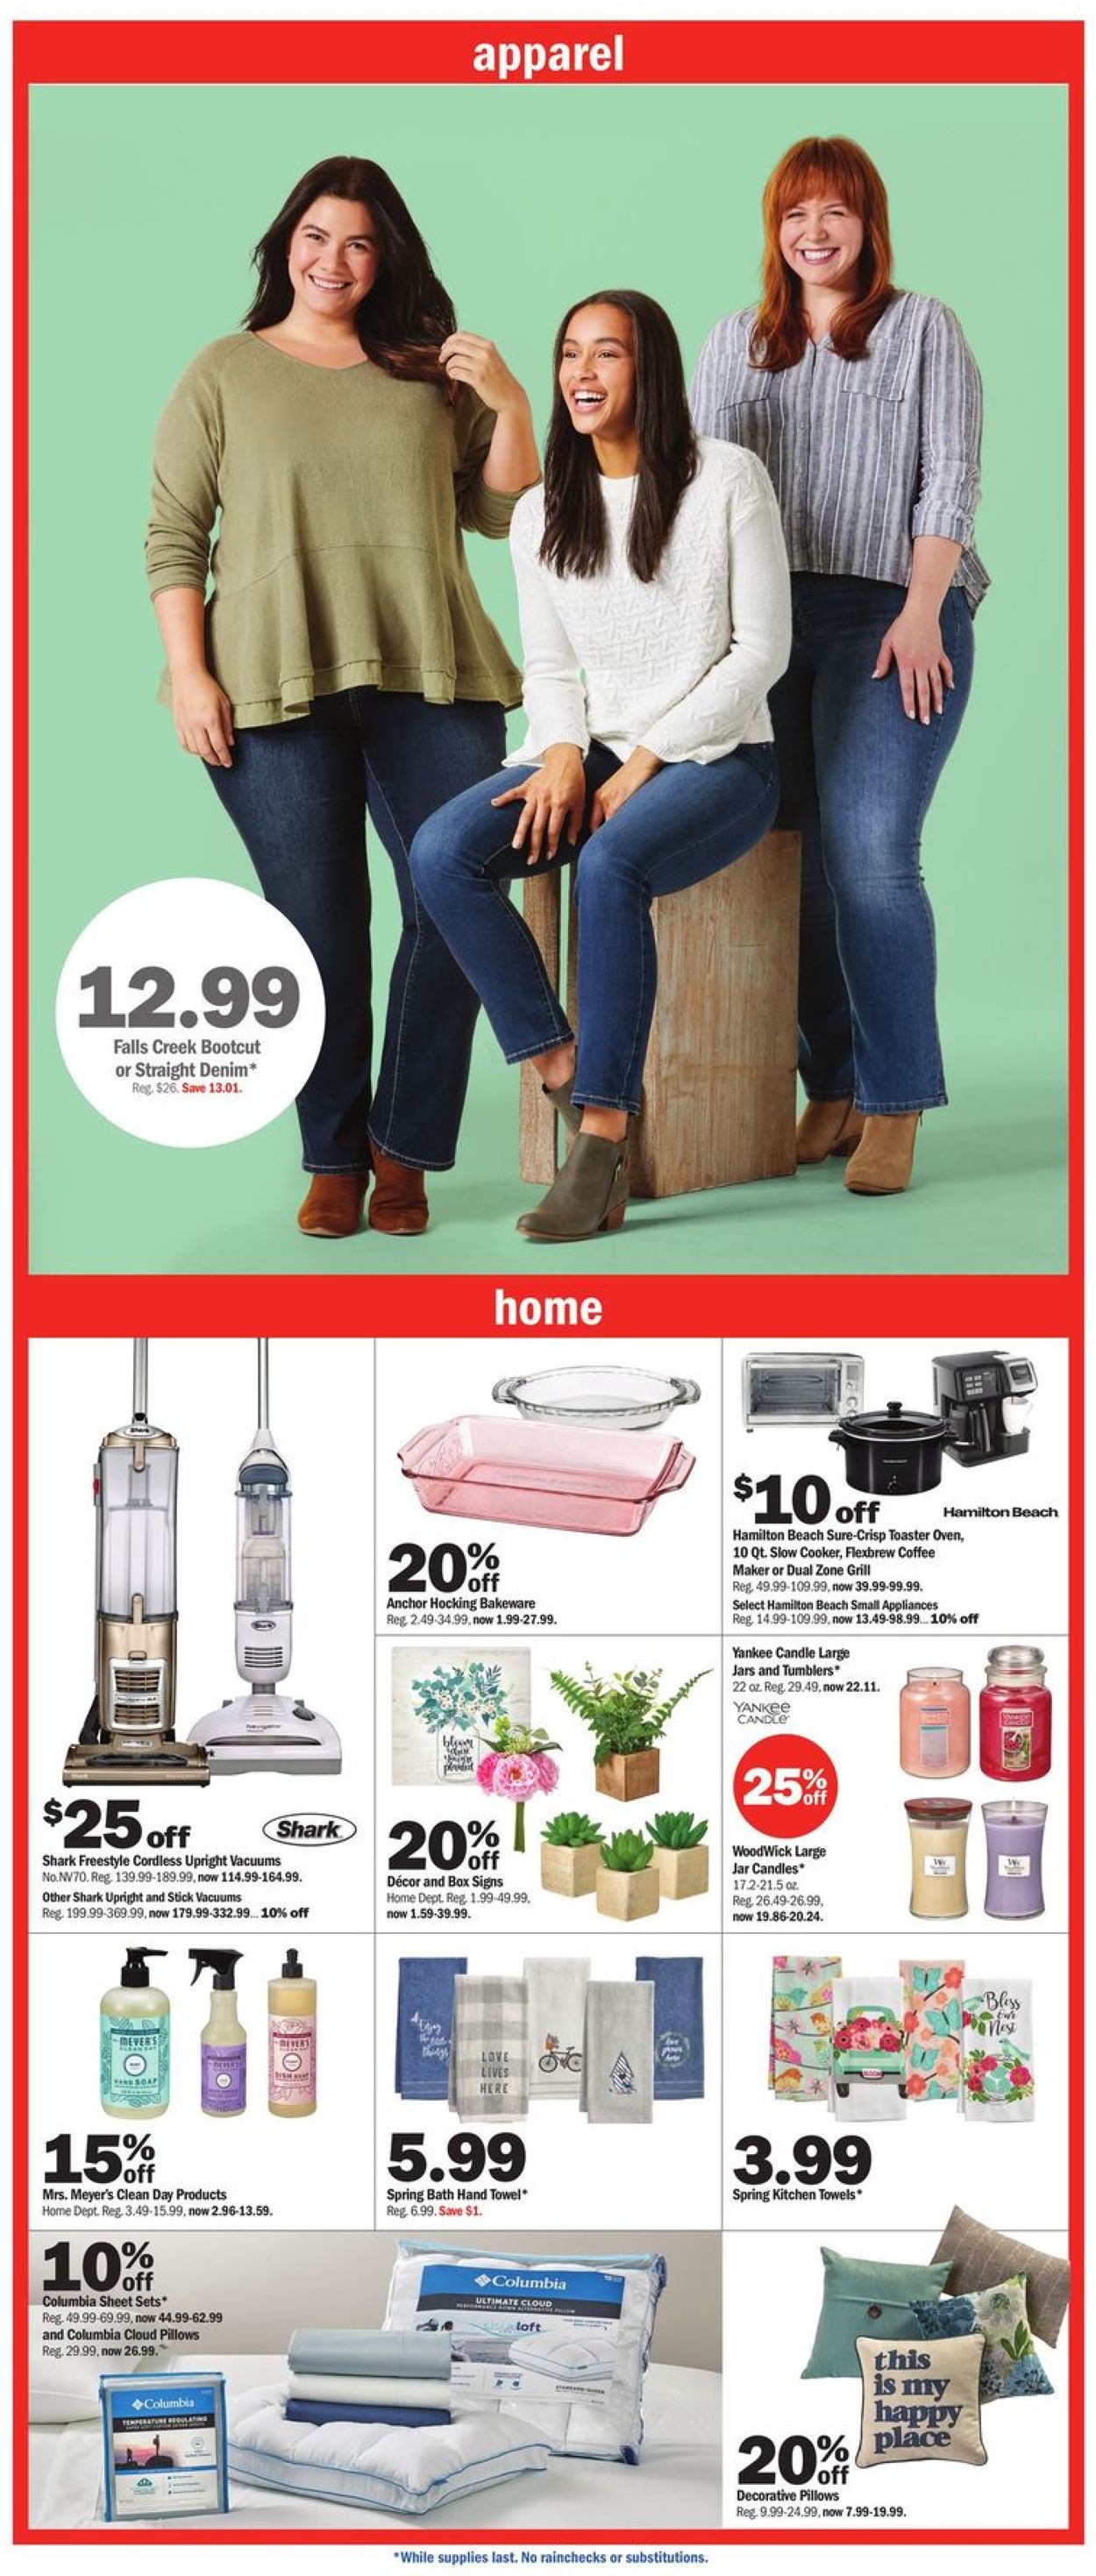 Meijer Current weekly ad 02/09 - 02/15/2020 [14] - frequent-ads.com